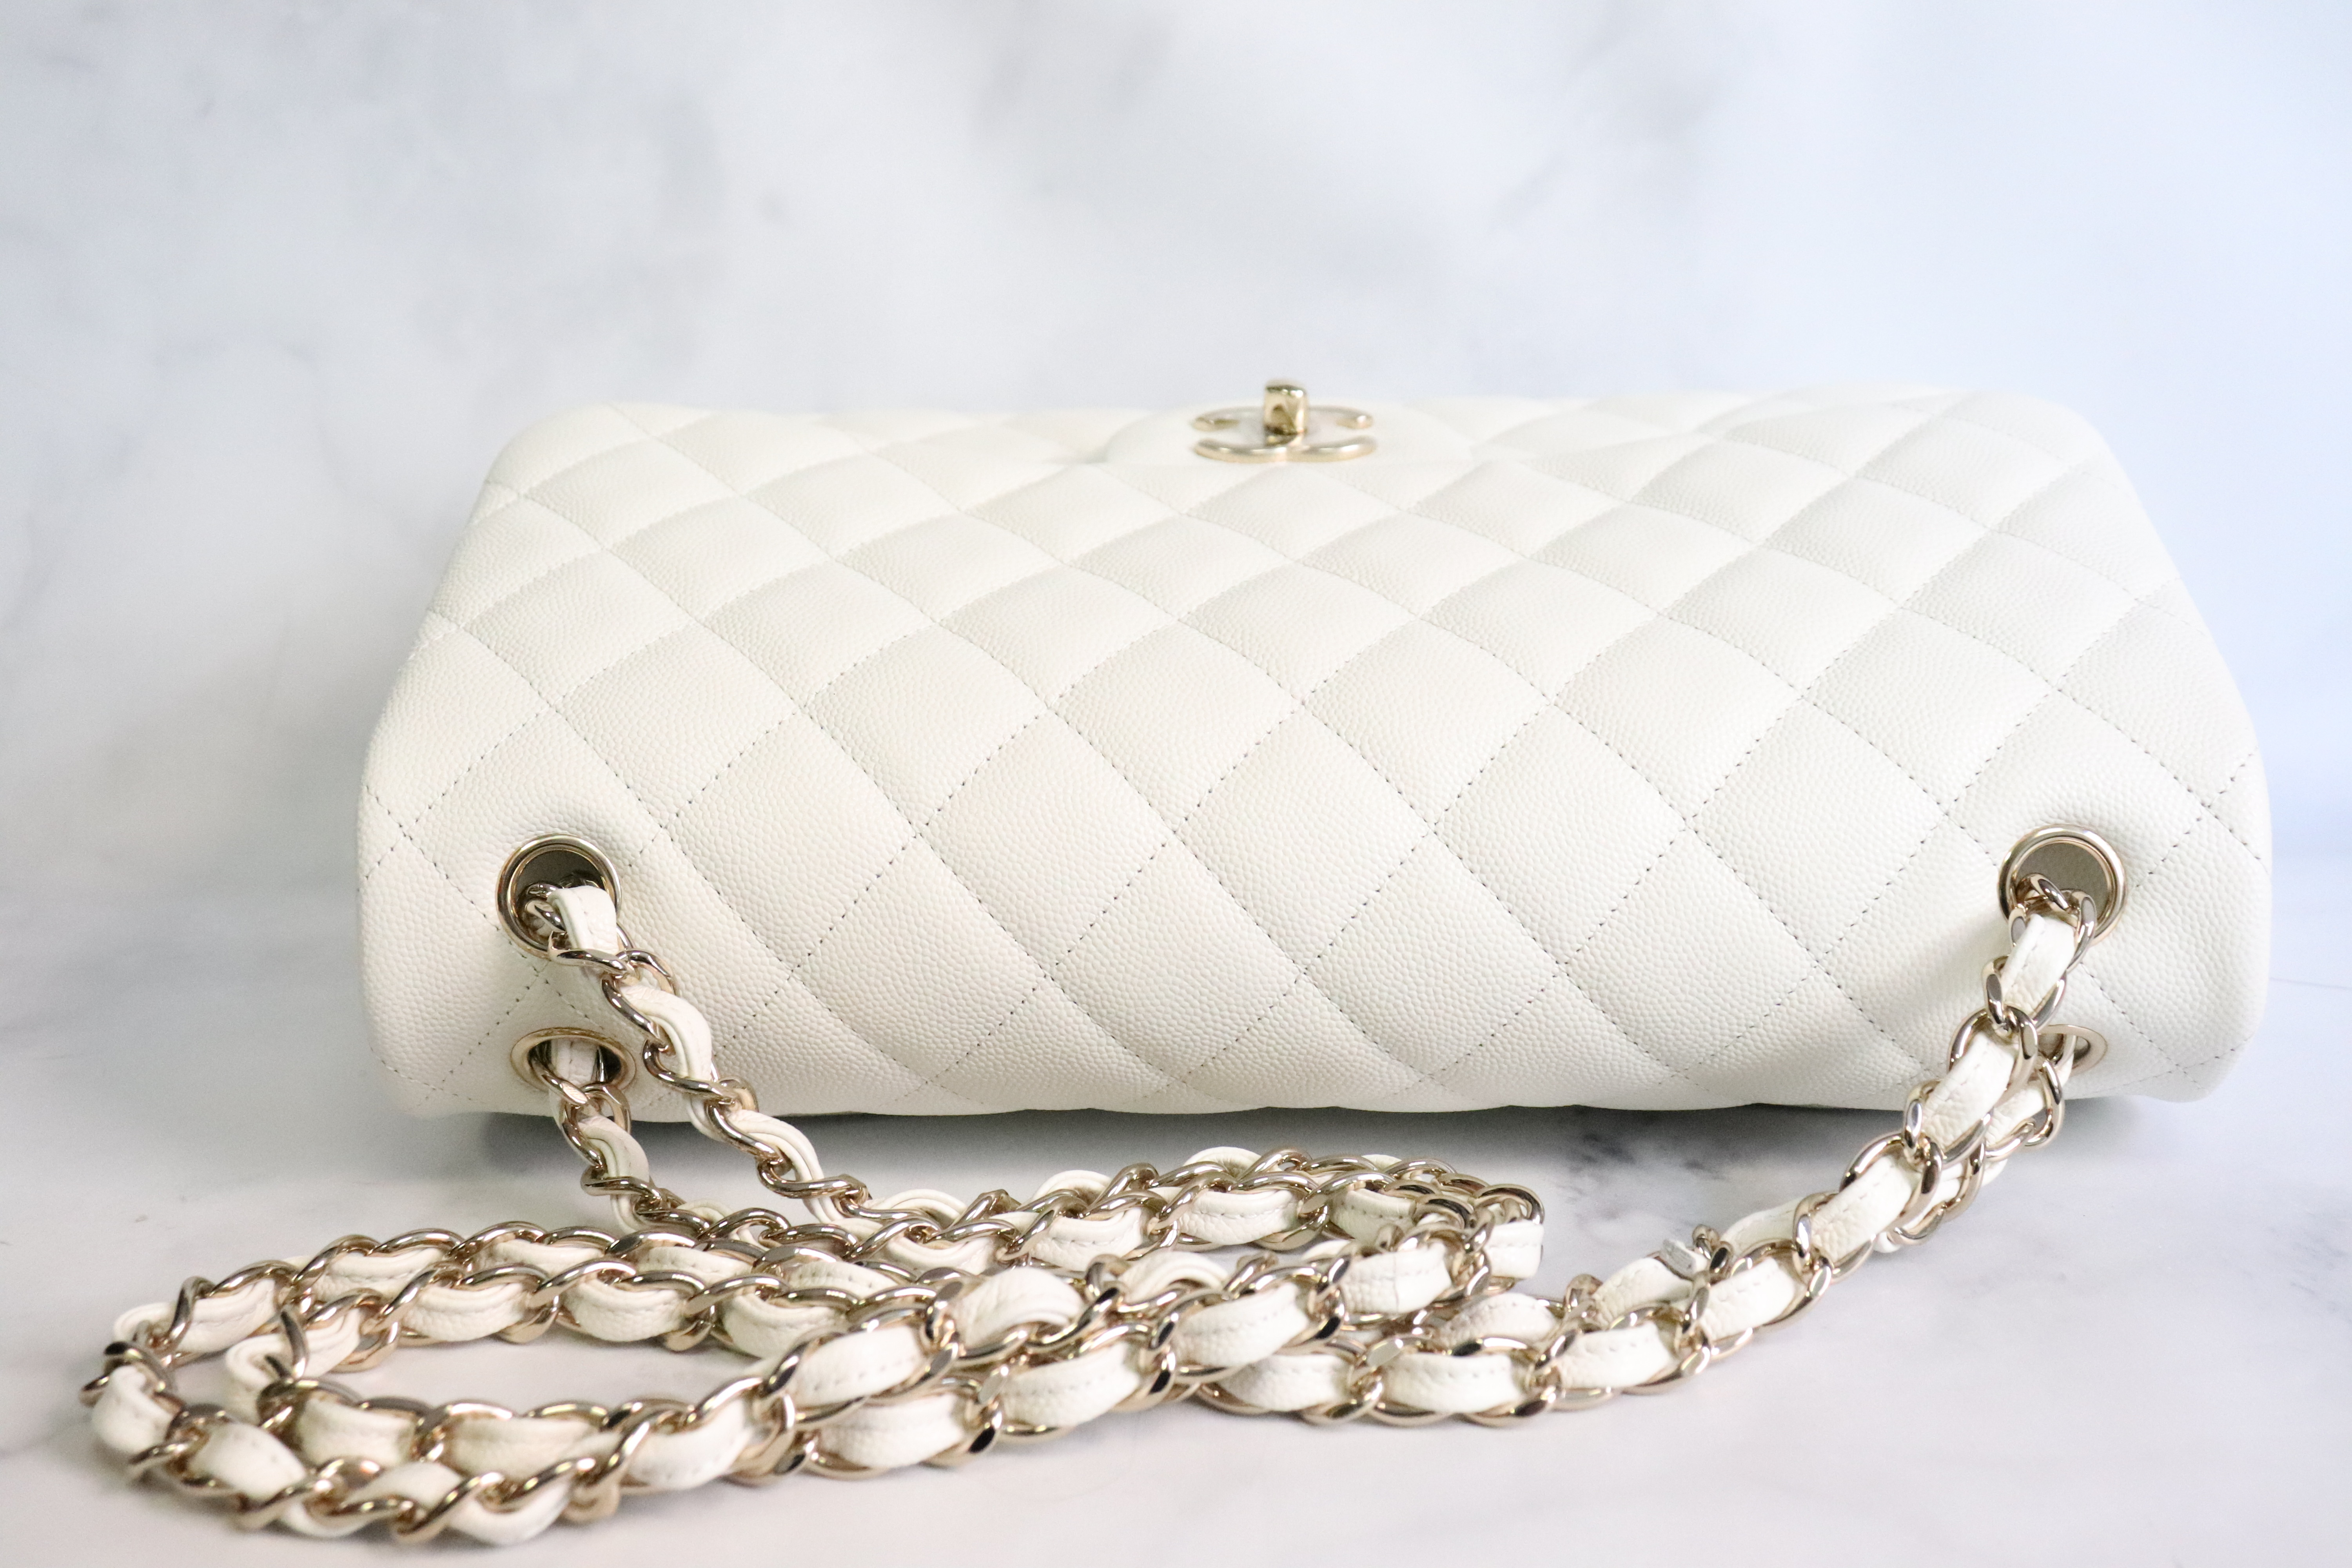 Chanel Sac Class Rabat Caviar Double Flap Silver Hardware (off white)  *Authentic*